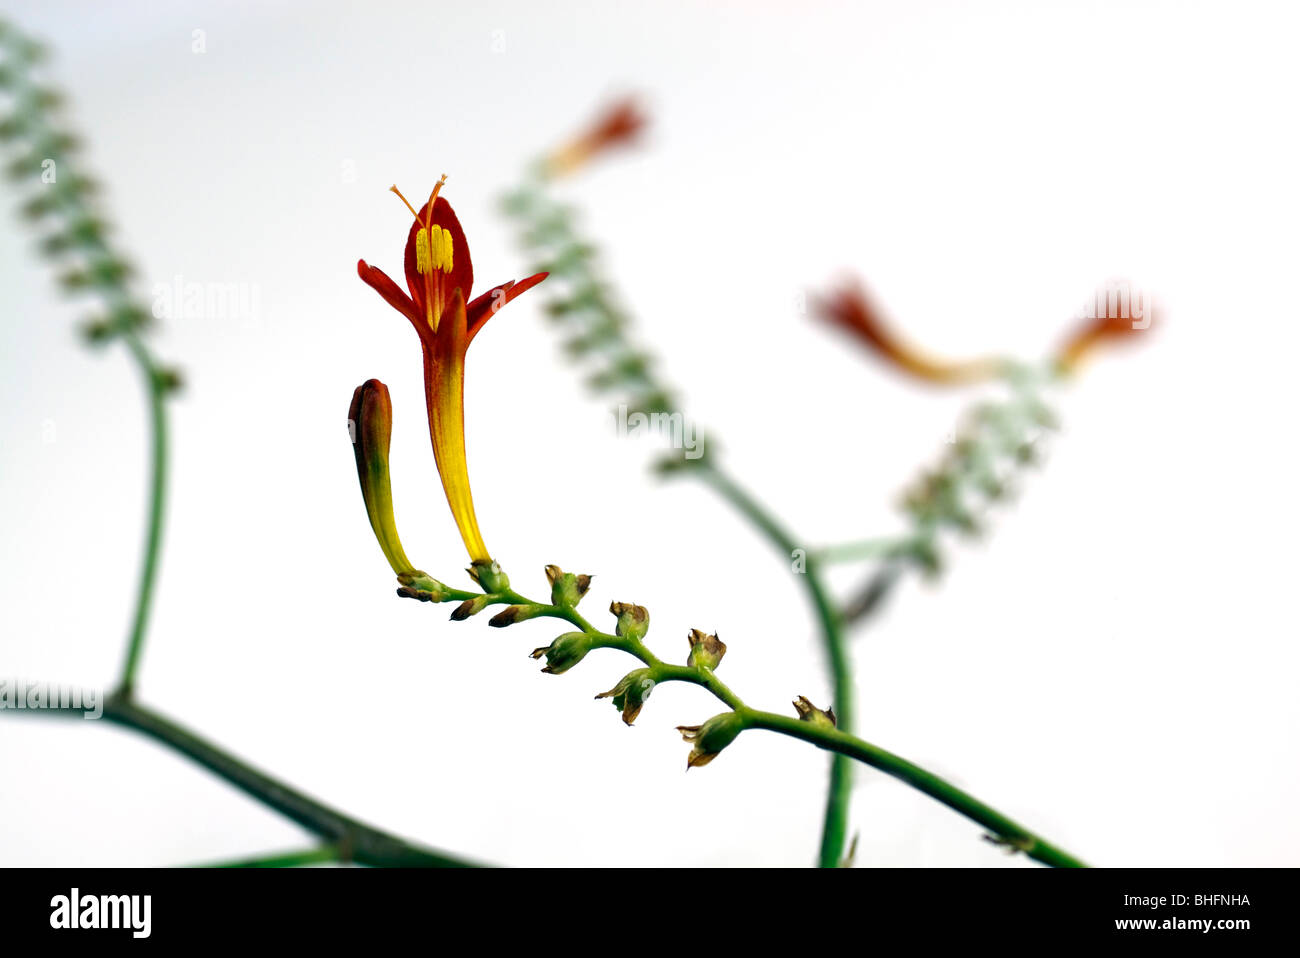 A minimalistic abstract of delicate red and yellow blossoms against a white background. Isolated. Iridaceae Crocosmia masonorum. Stock Photo